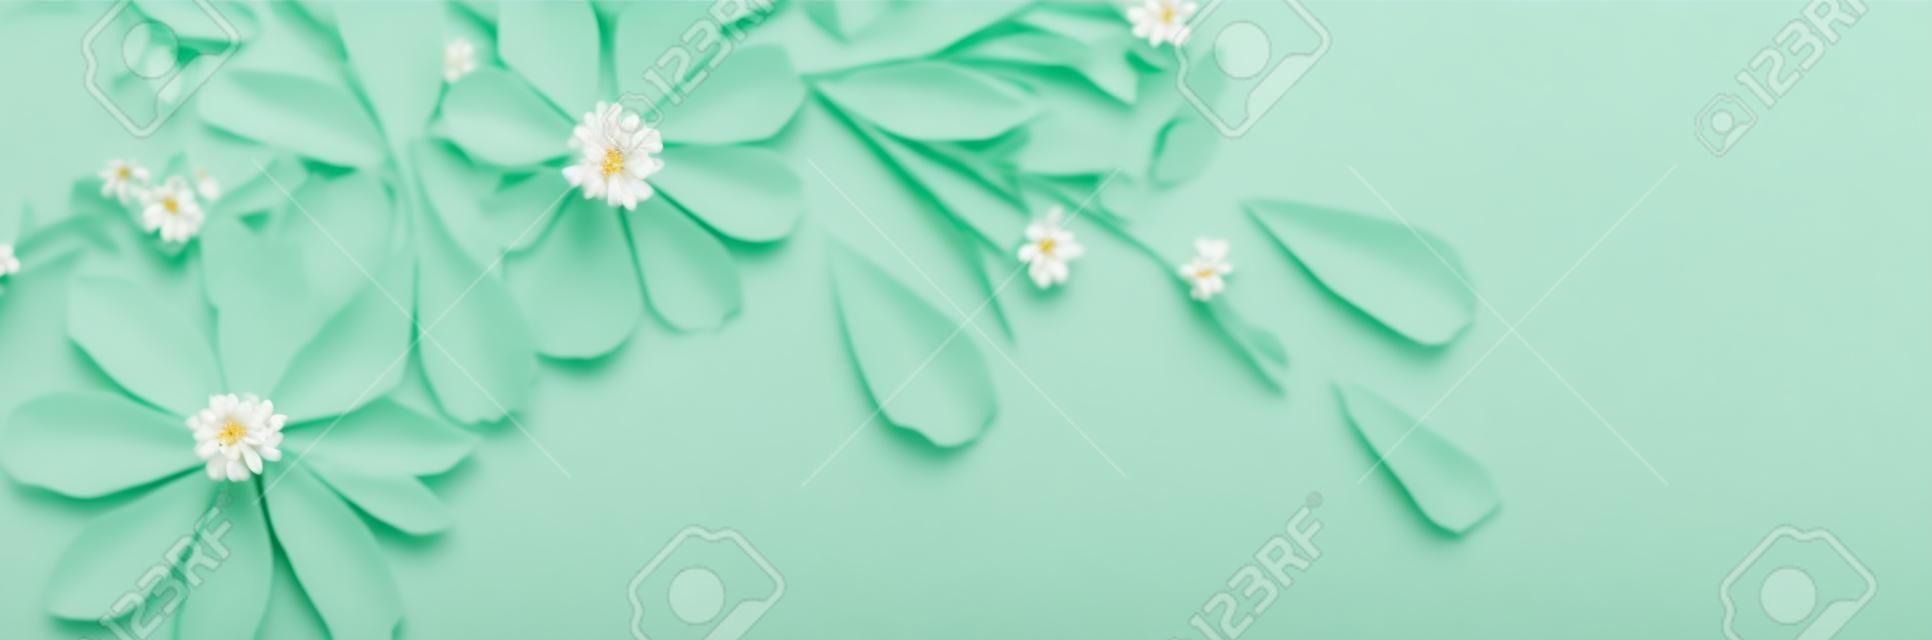 white flowers on green paper background